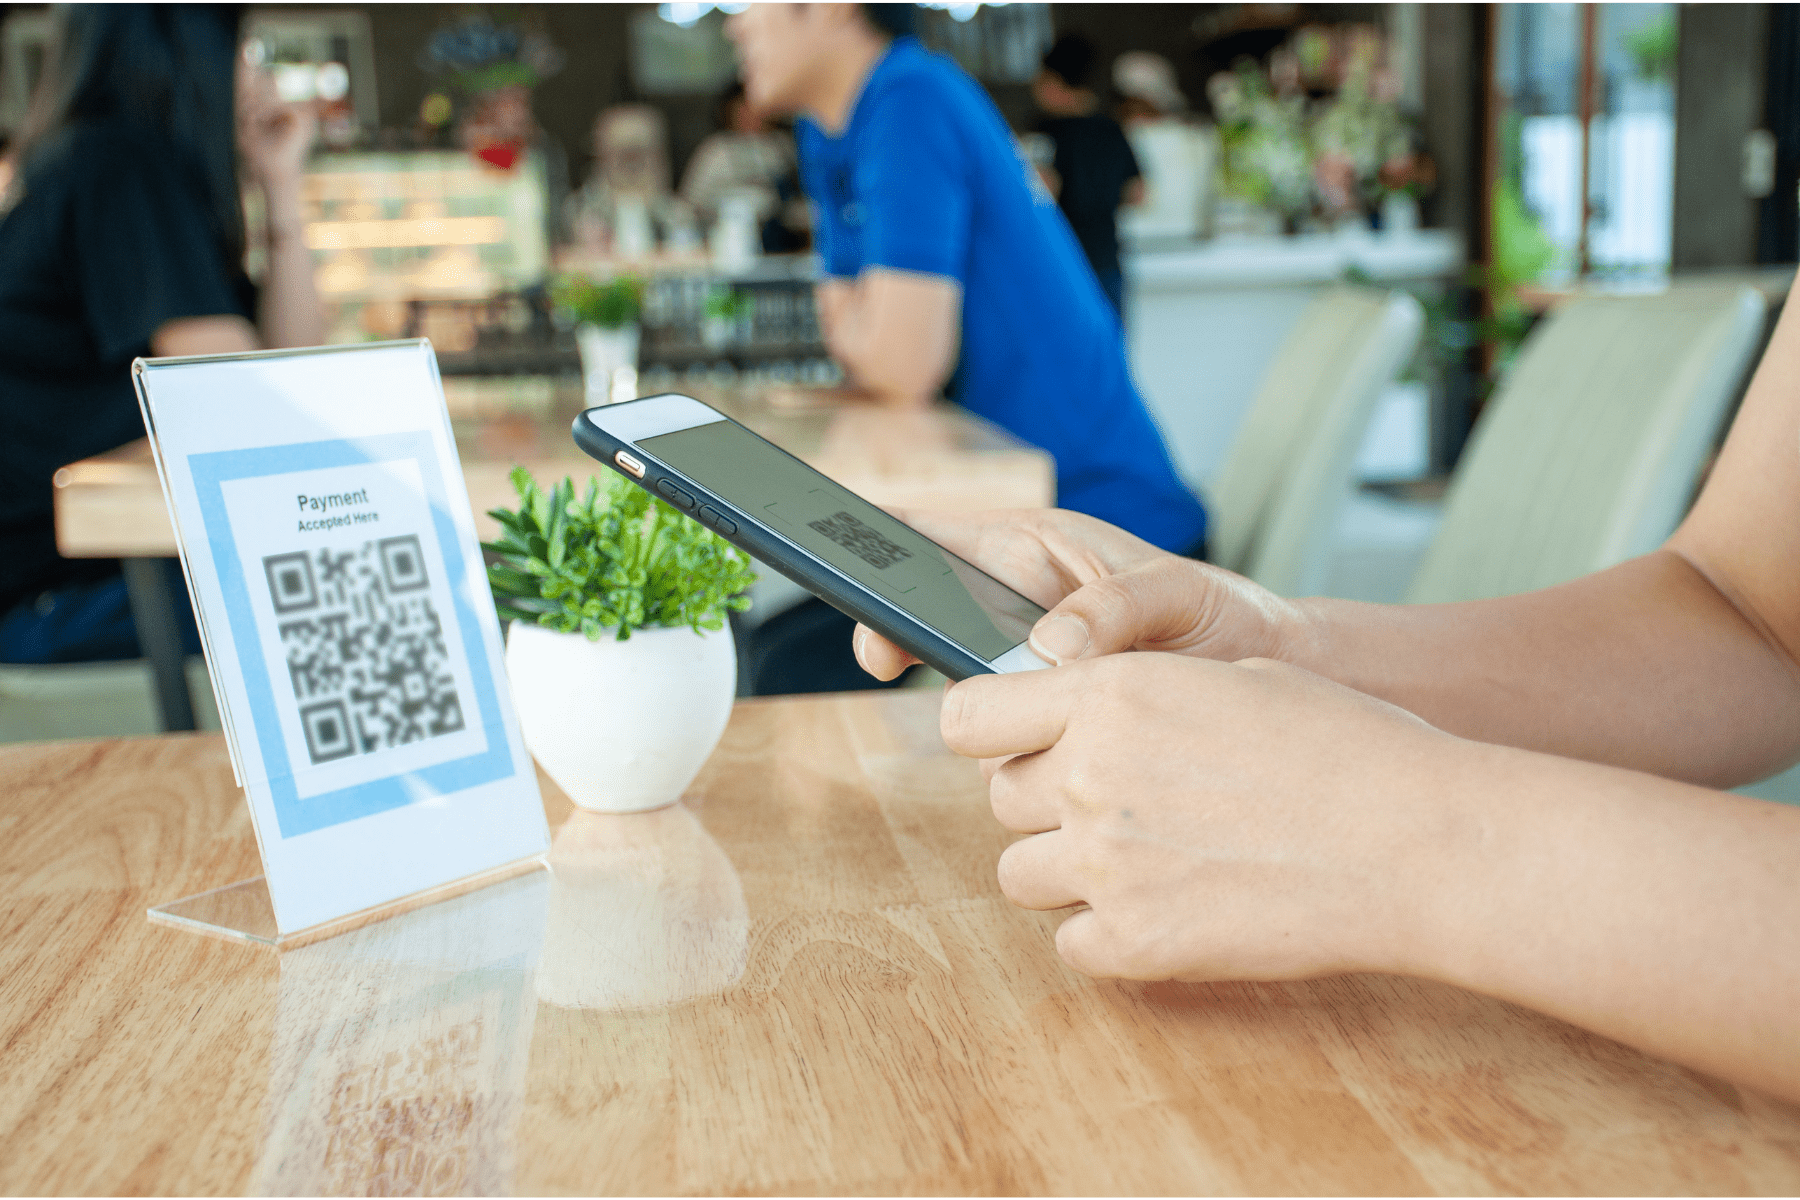 person using phone to scan a qr code in a restaurant